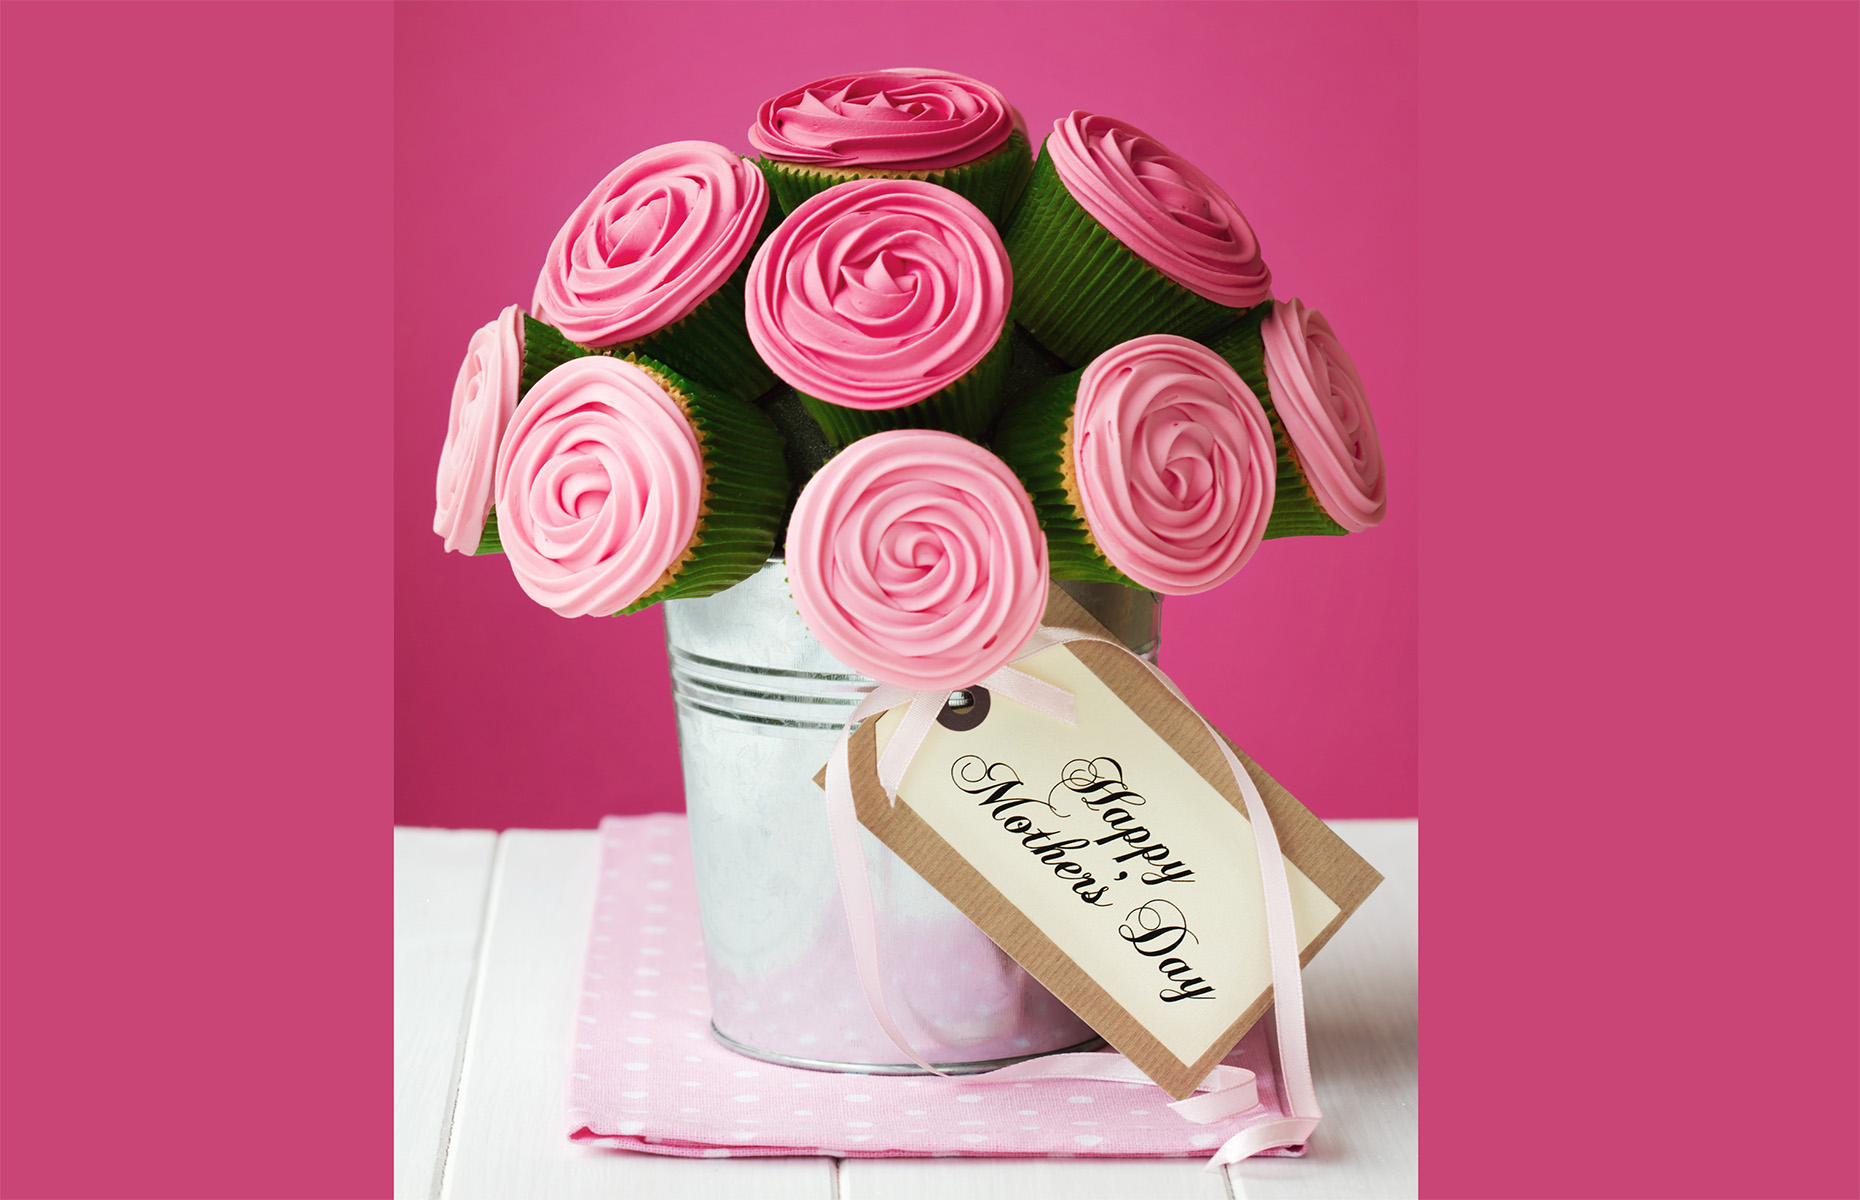 Mother's day cupcake bouquet (Image: Ruth Black/Shutterstock)